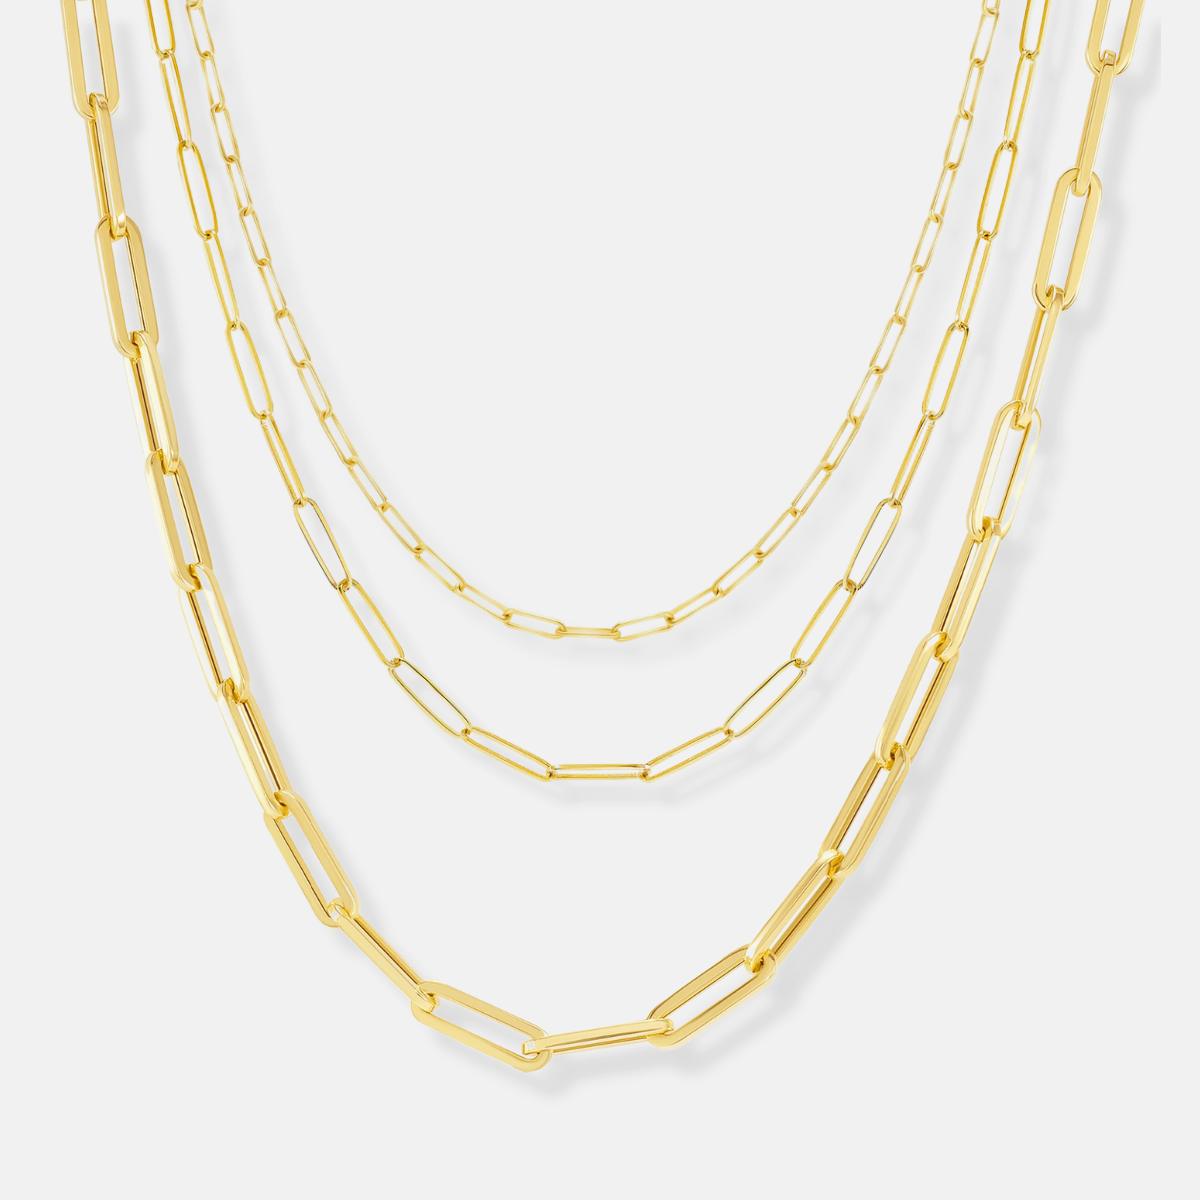 paperclip chain necklace in heavy, medium and dainty weight